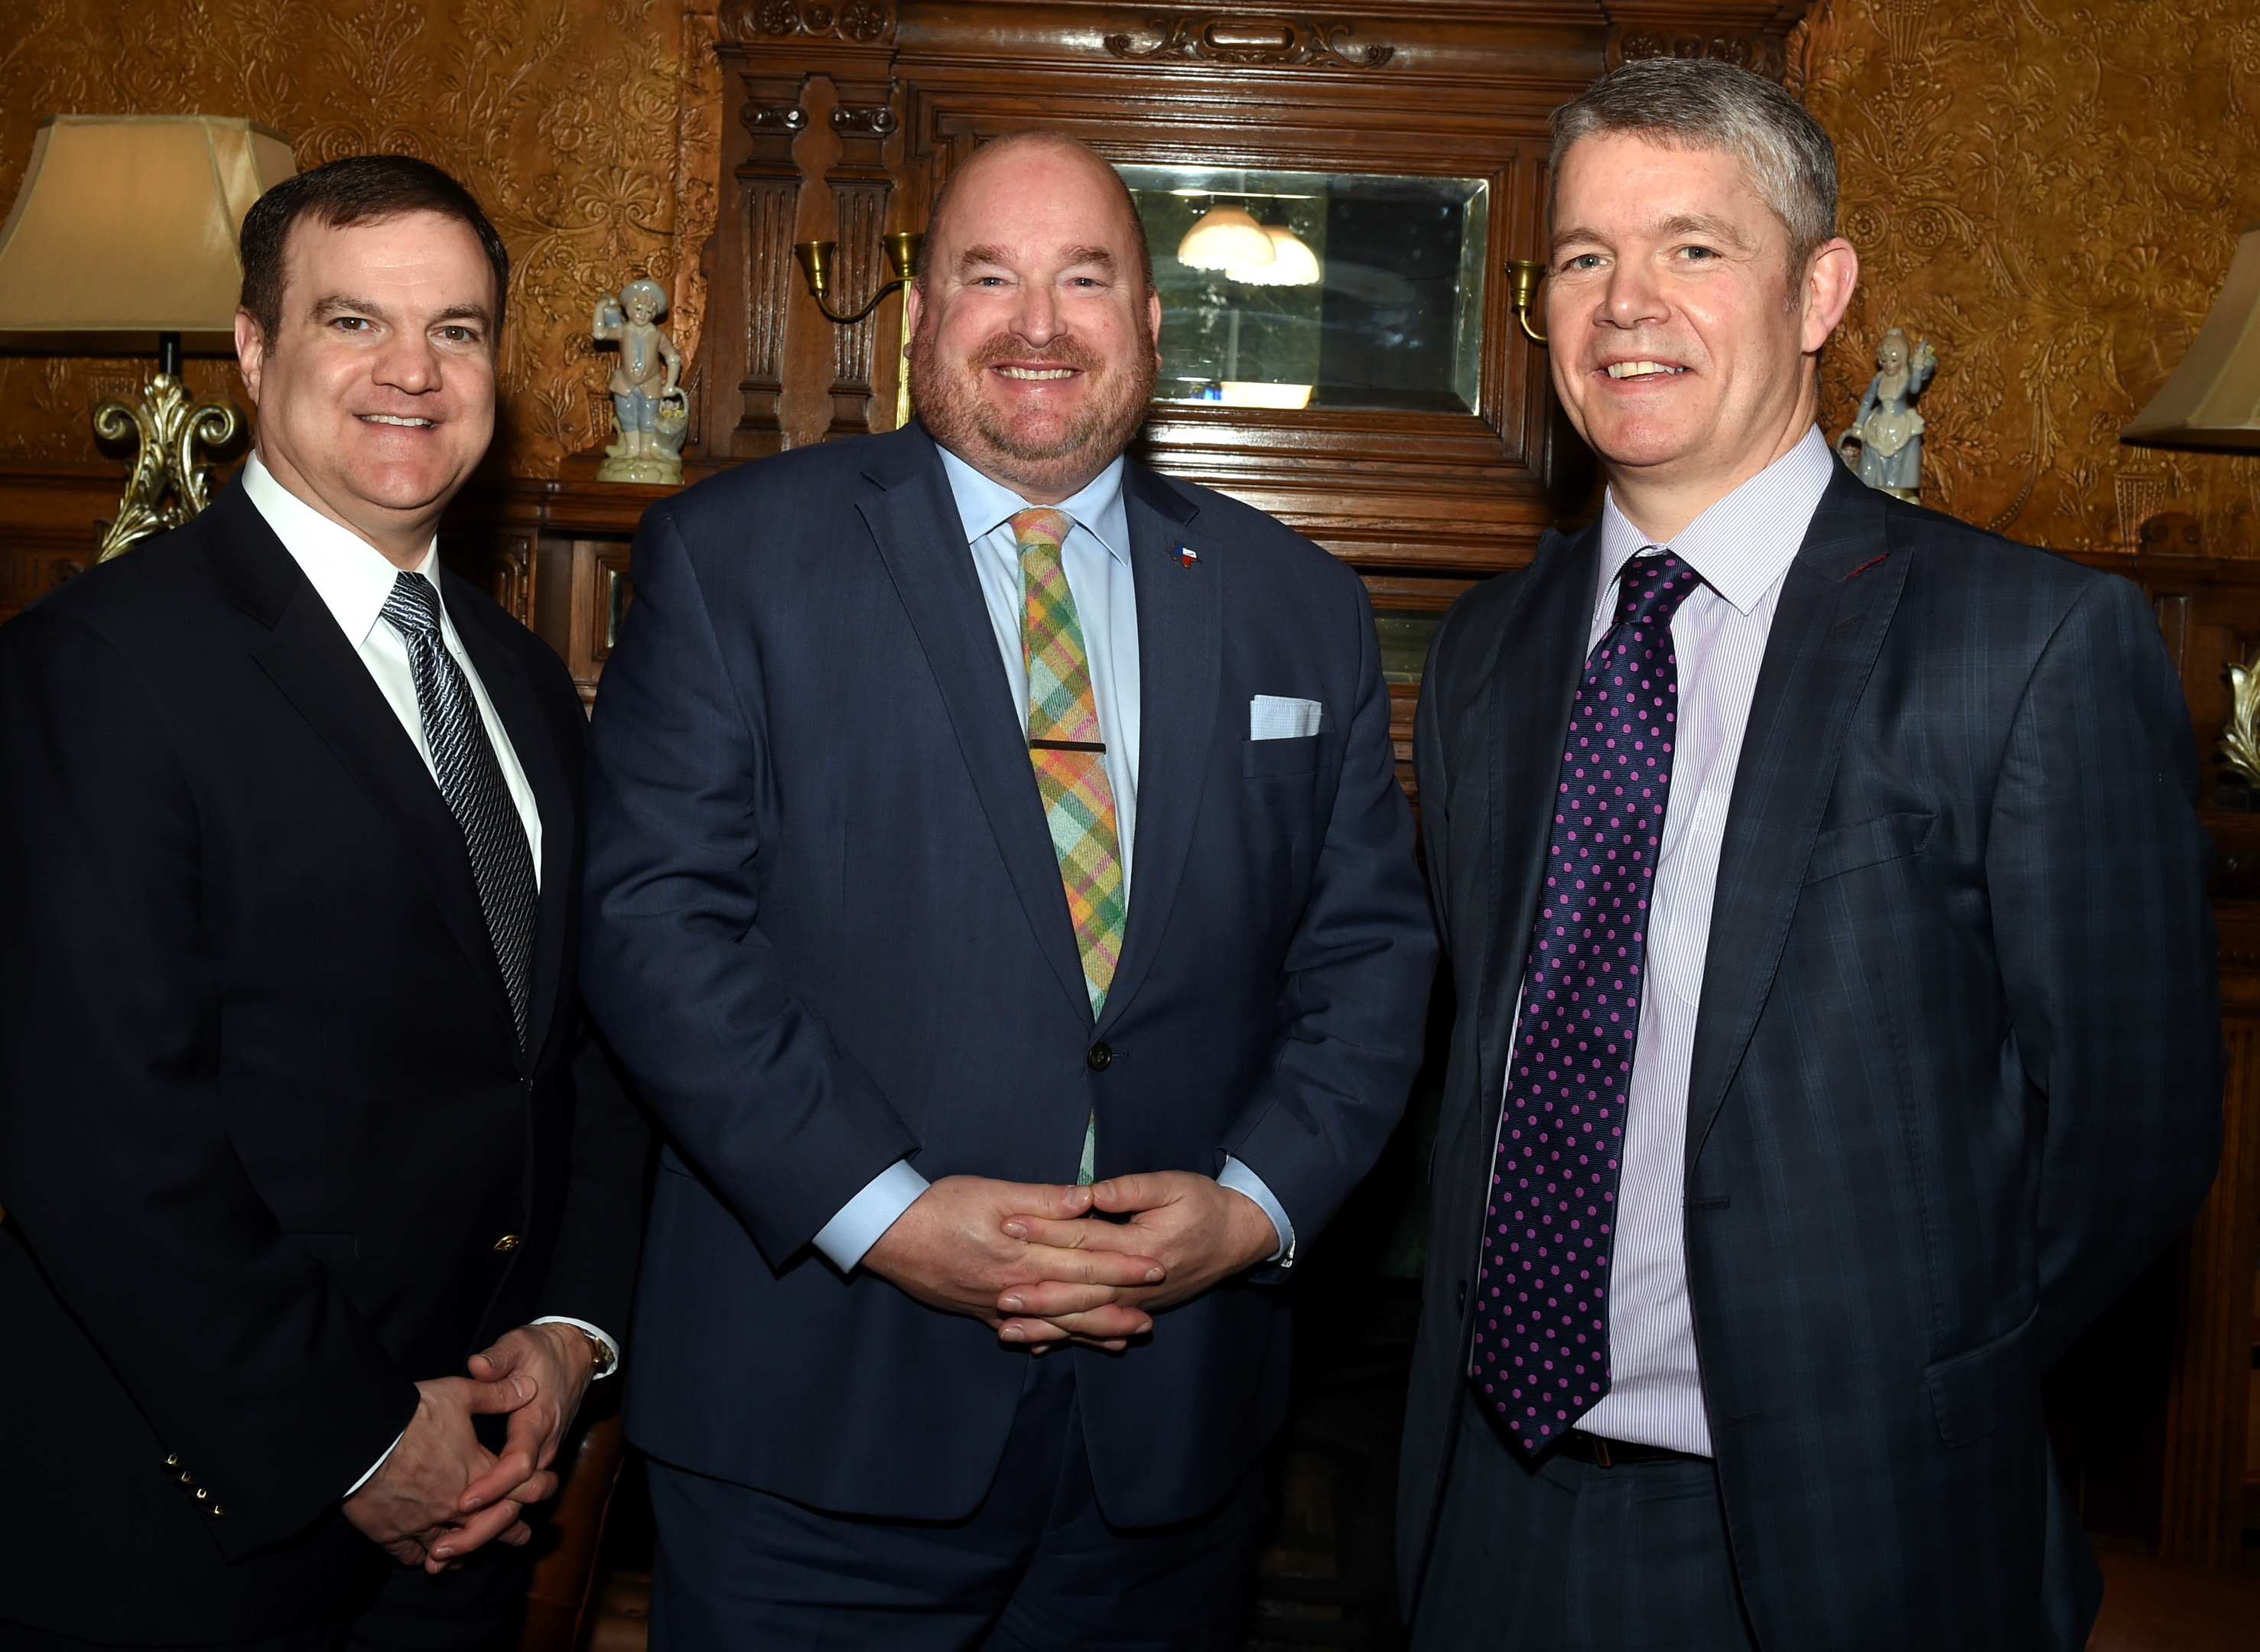 The Aberdeen-Houston gateway, 2018 annual knowledge sharing and networking lunch at Norwood Hotel, Aberdeen. In the picture are from left: Frank Landreneau, chief financial officer, PKF Texas: Jeffrey H D Blair, director Europe, Middle East and Africa, greater Houston Partnership and Ewan Cameron, SDI.